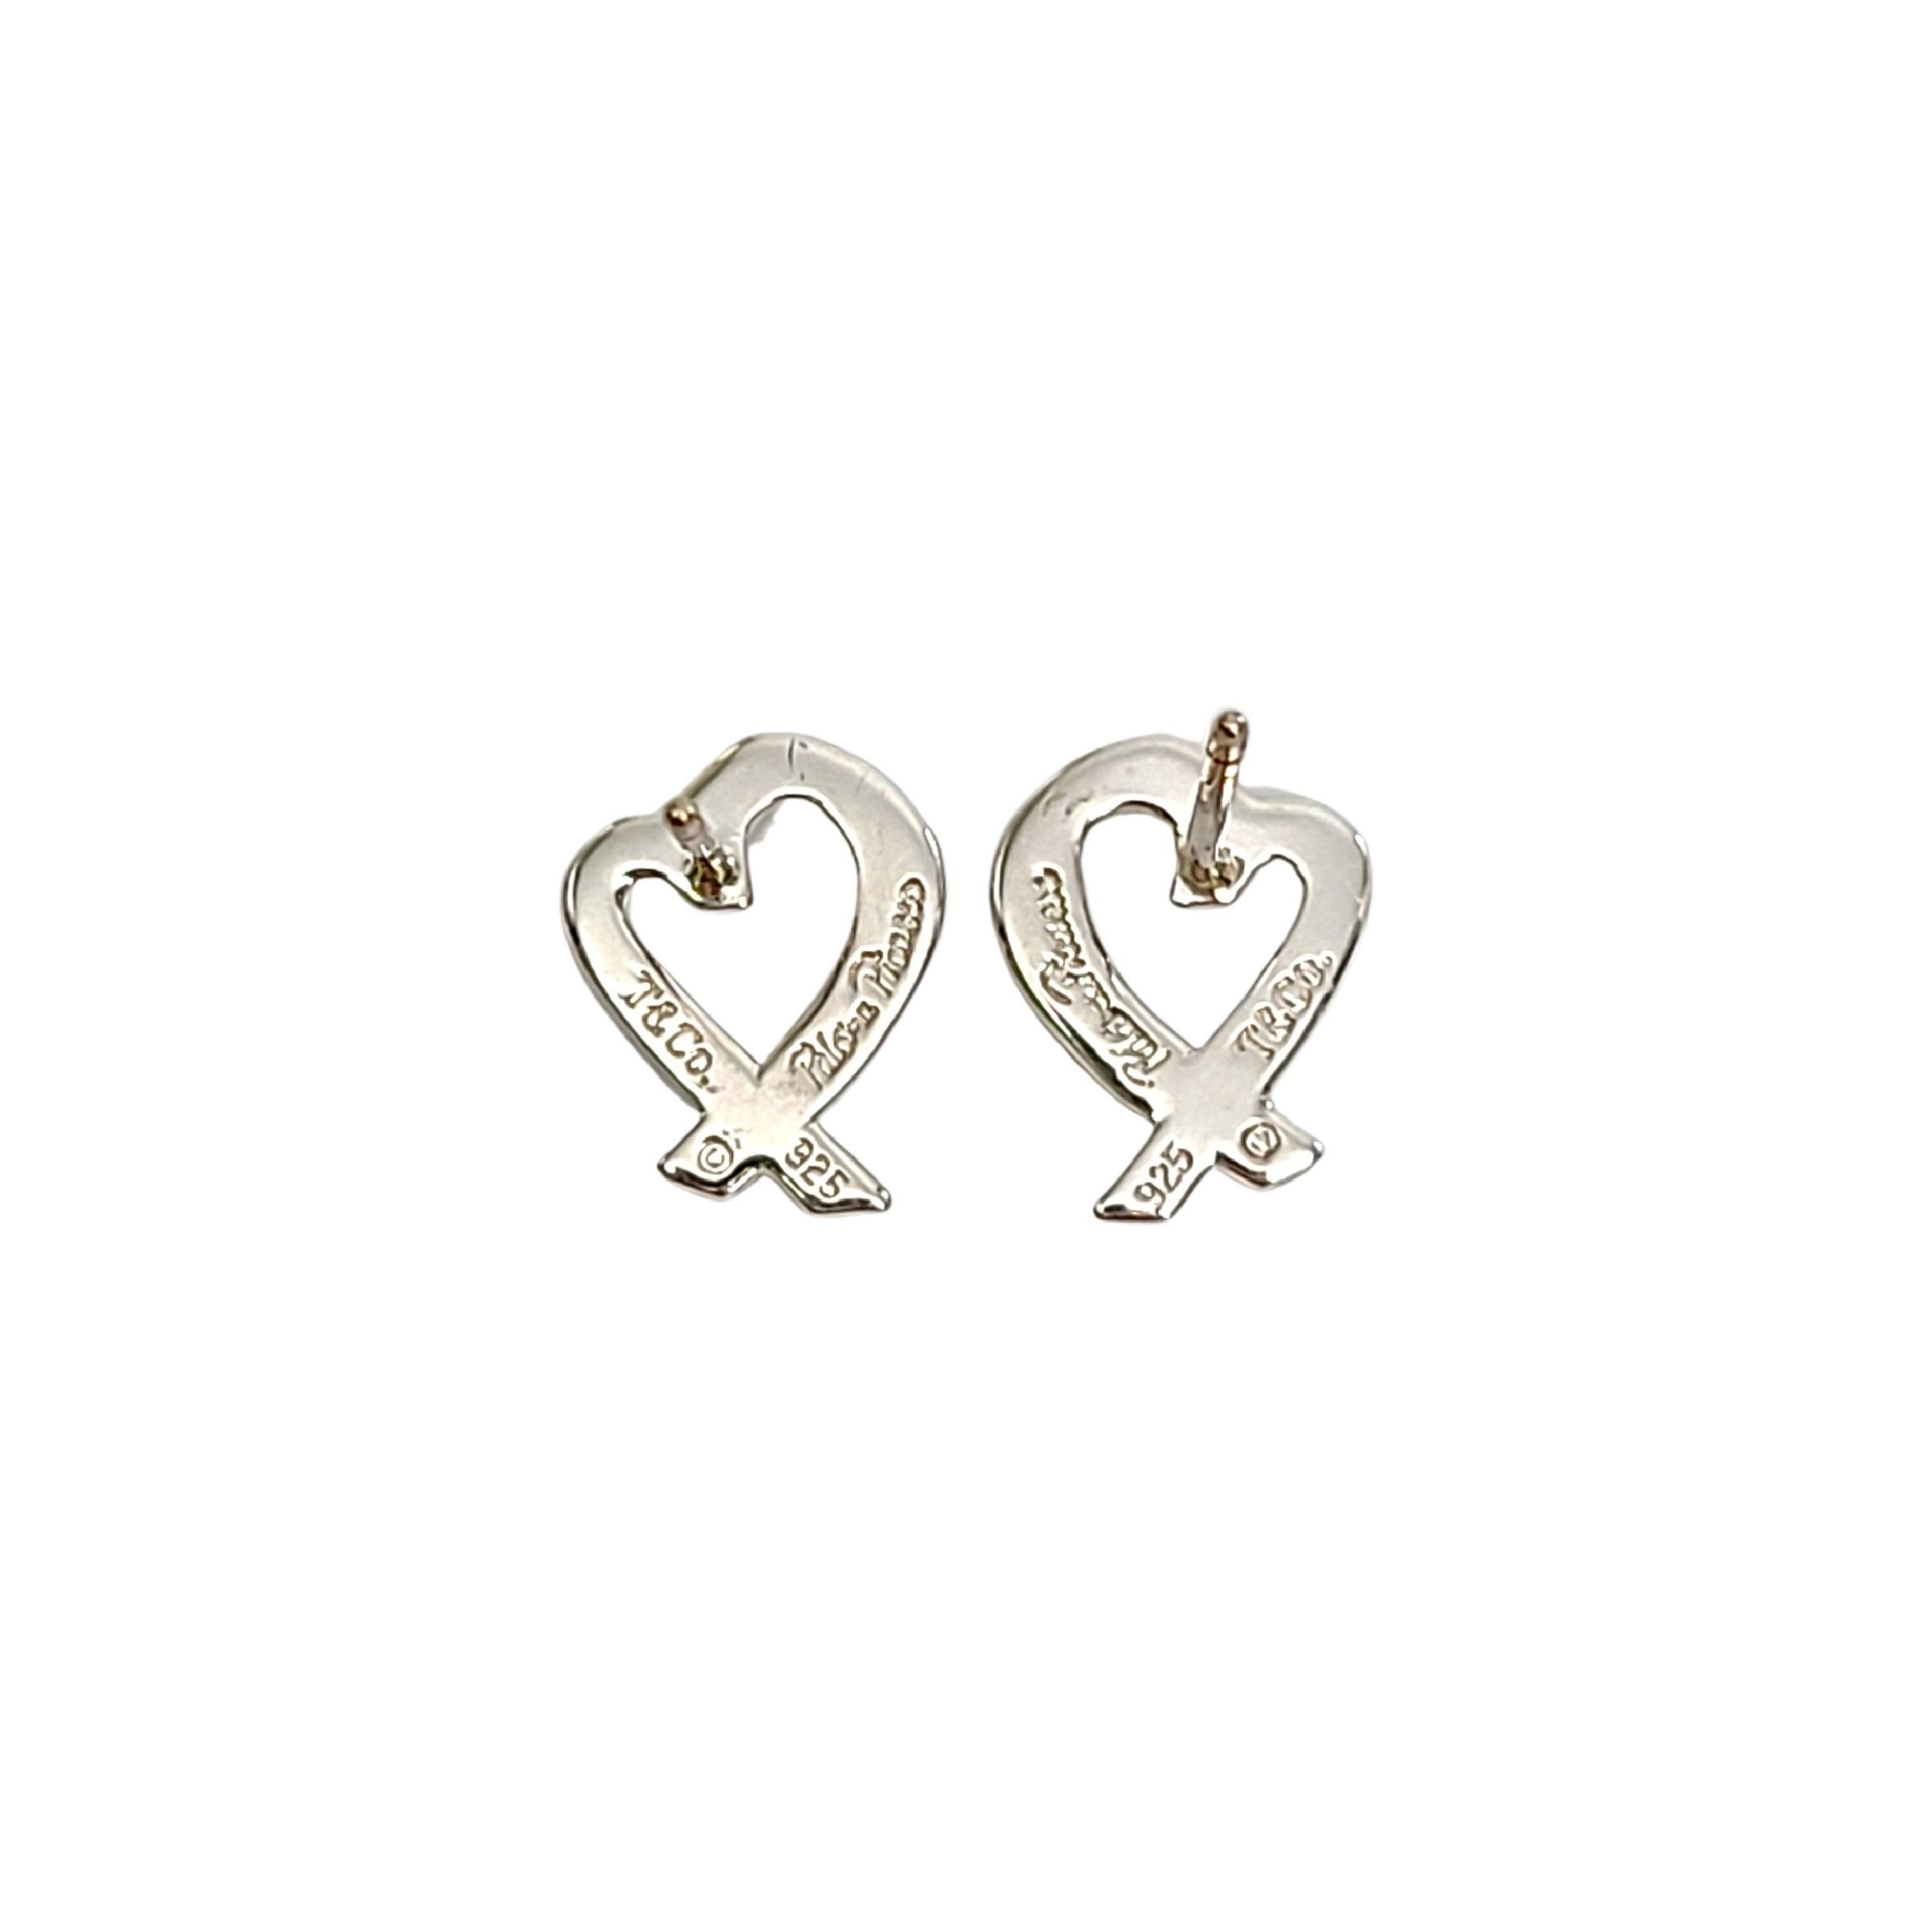 Tiffany & Co sterling silver Loving Heart earrings by Paloma Picasso.

Authentic Tiffany earrings featuring small open hearts. 1 earring back is NOT Tiffany. Tiffany box and pouch are not included.

Measures approx 10mm high, 8mm wide.

Weighs